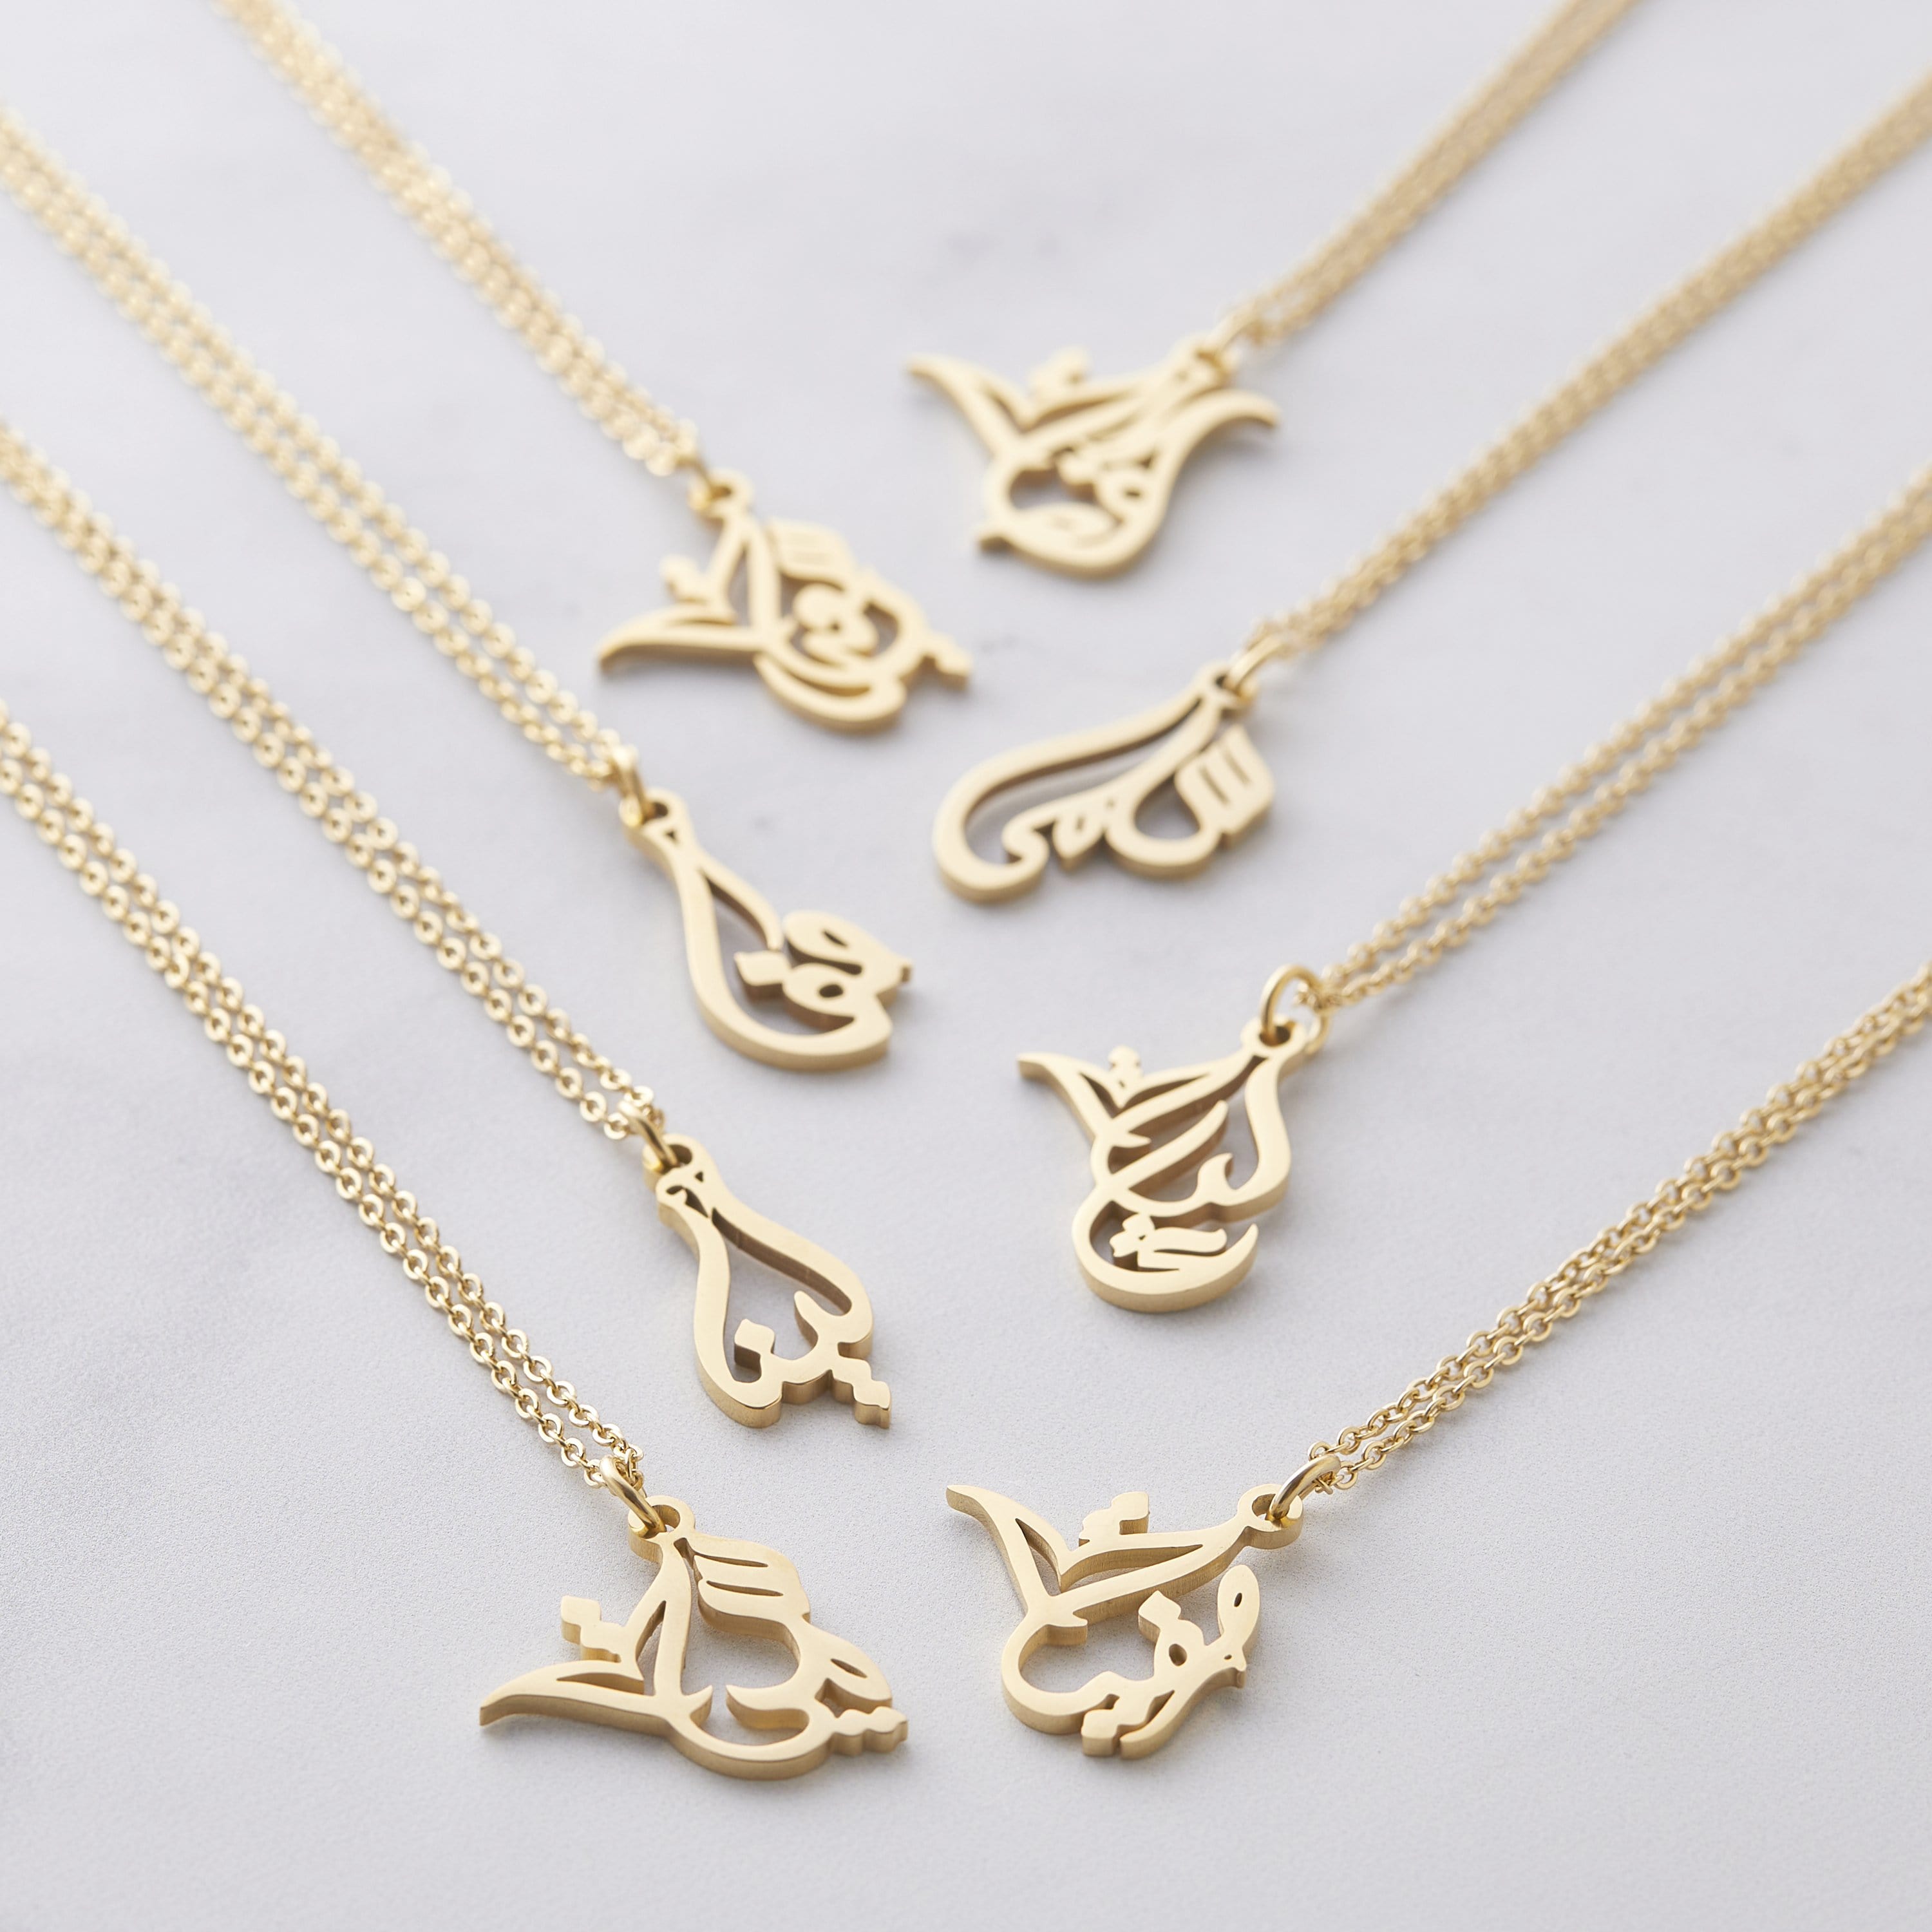 Ready Calligraphy Name Necklace - Nominal